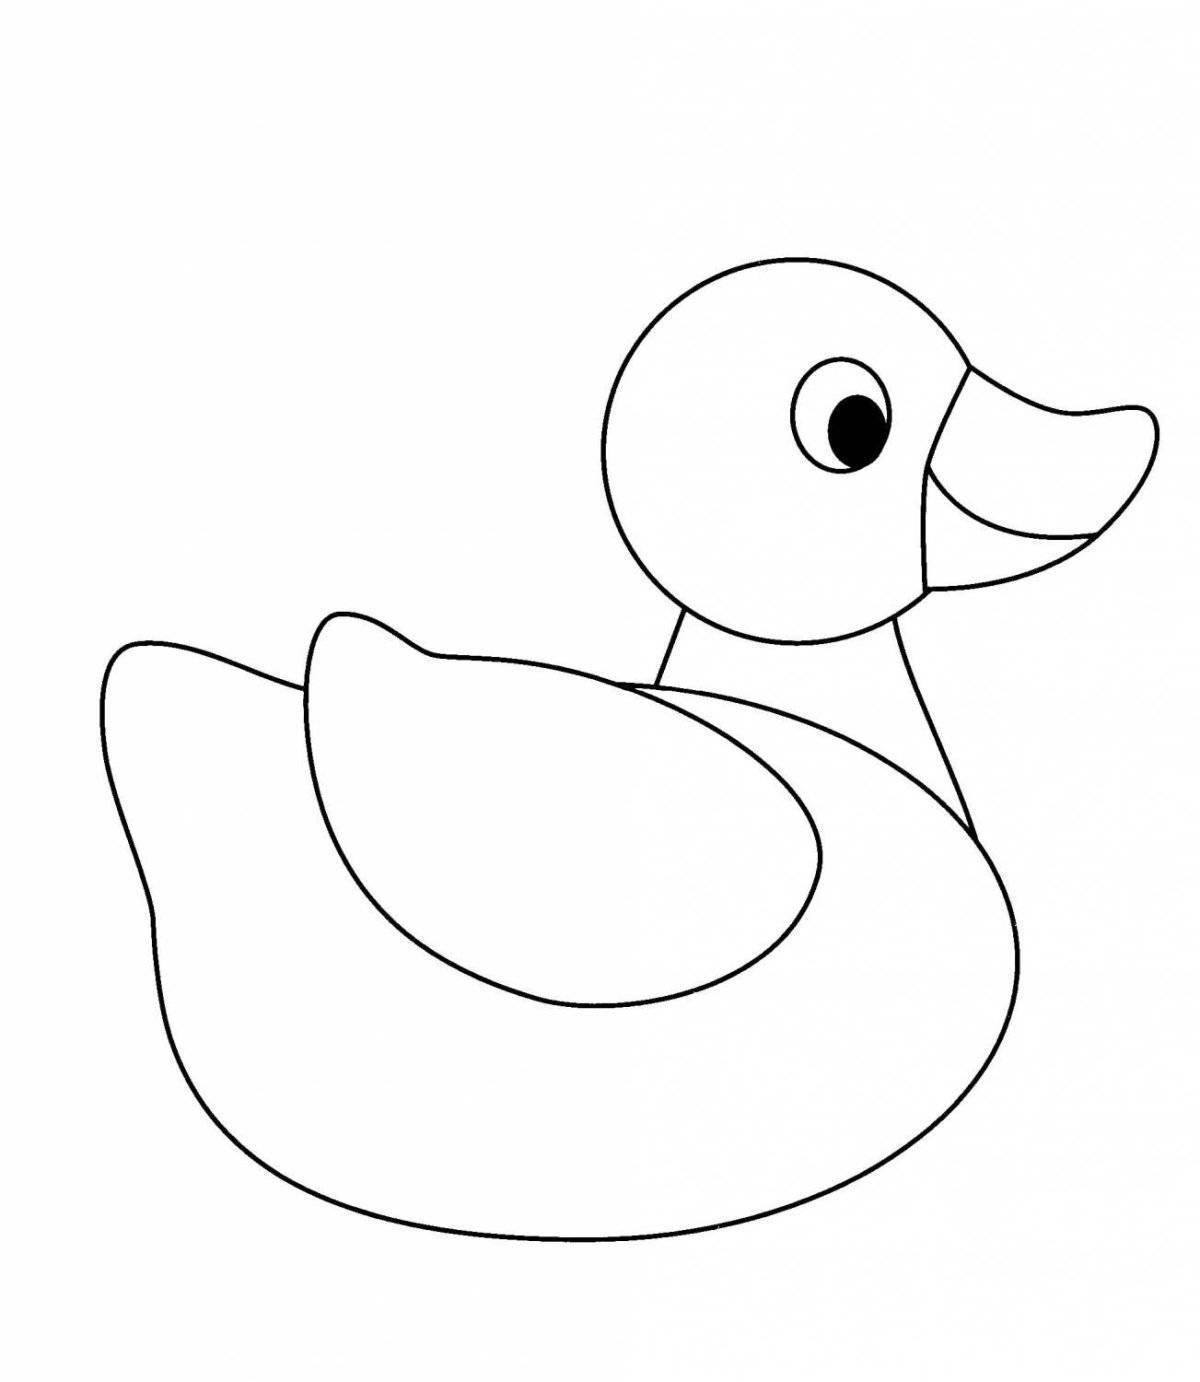 Happy rubber duck coloring page